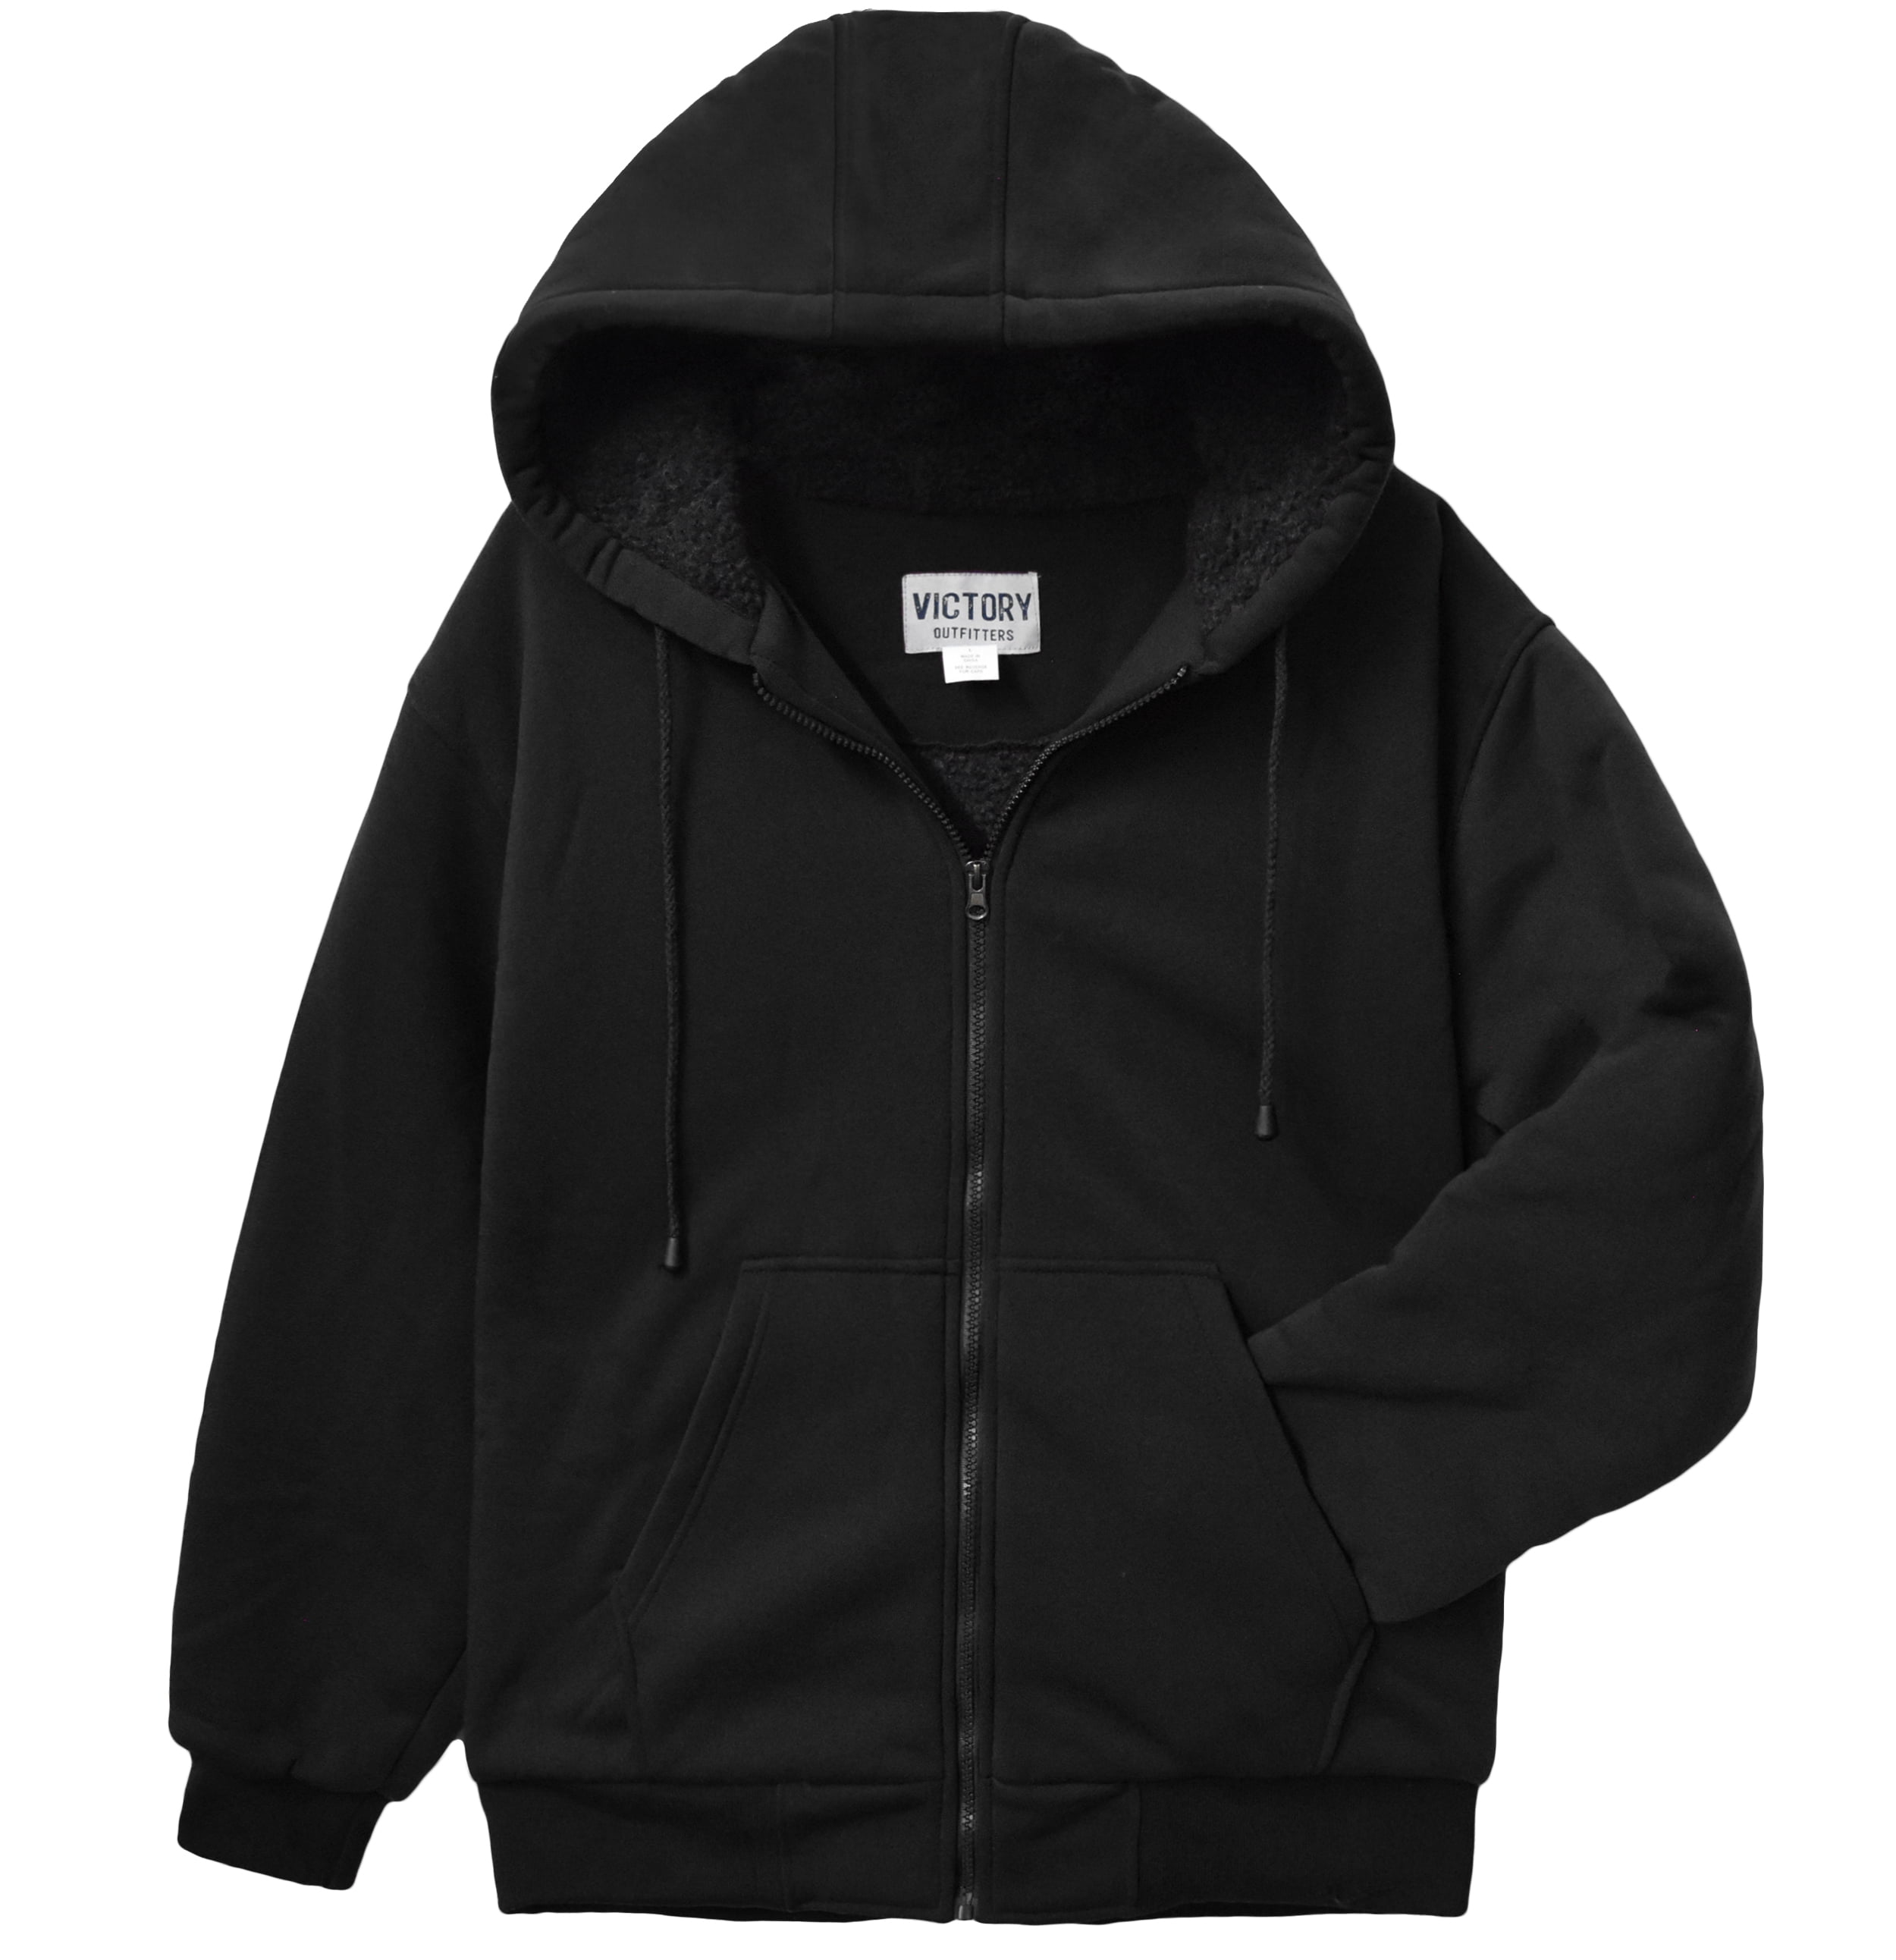 Victory Outfitters Men's Sherpa Lined Zip Up Fleece Hoodie - Black - L ...